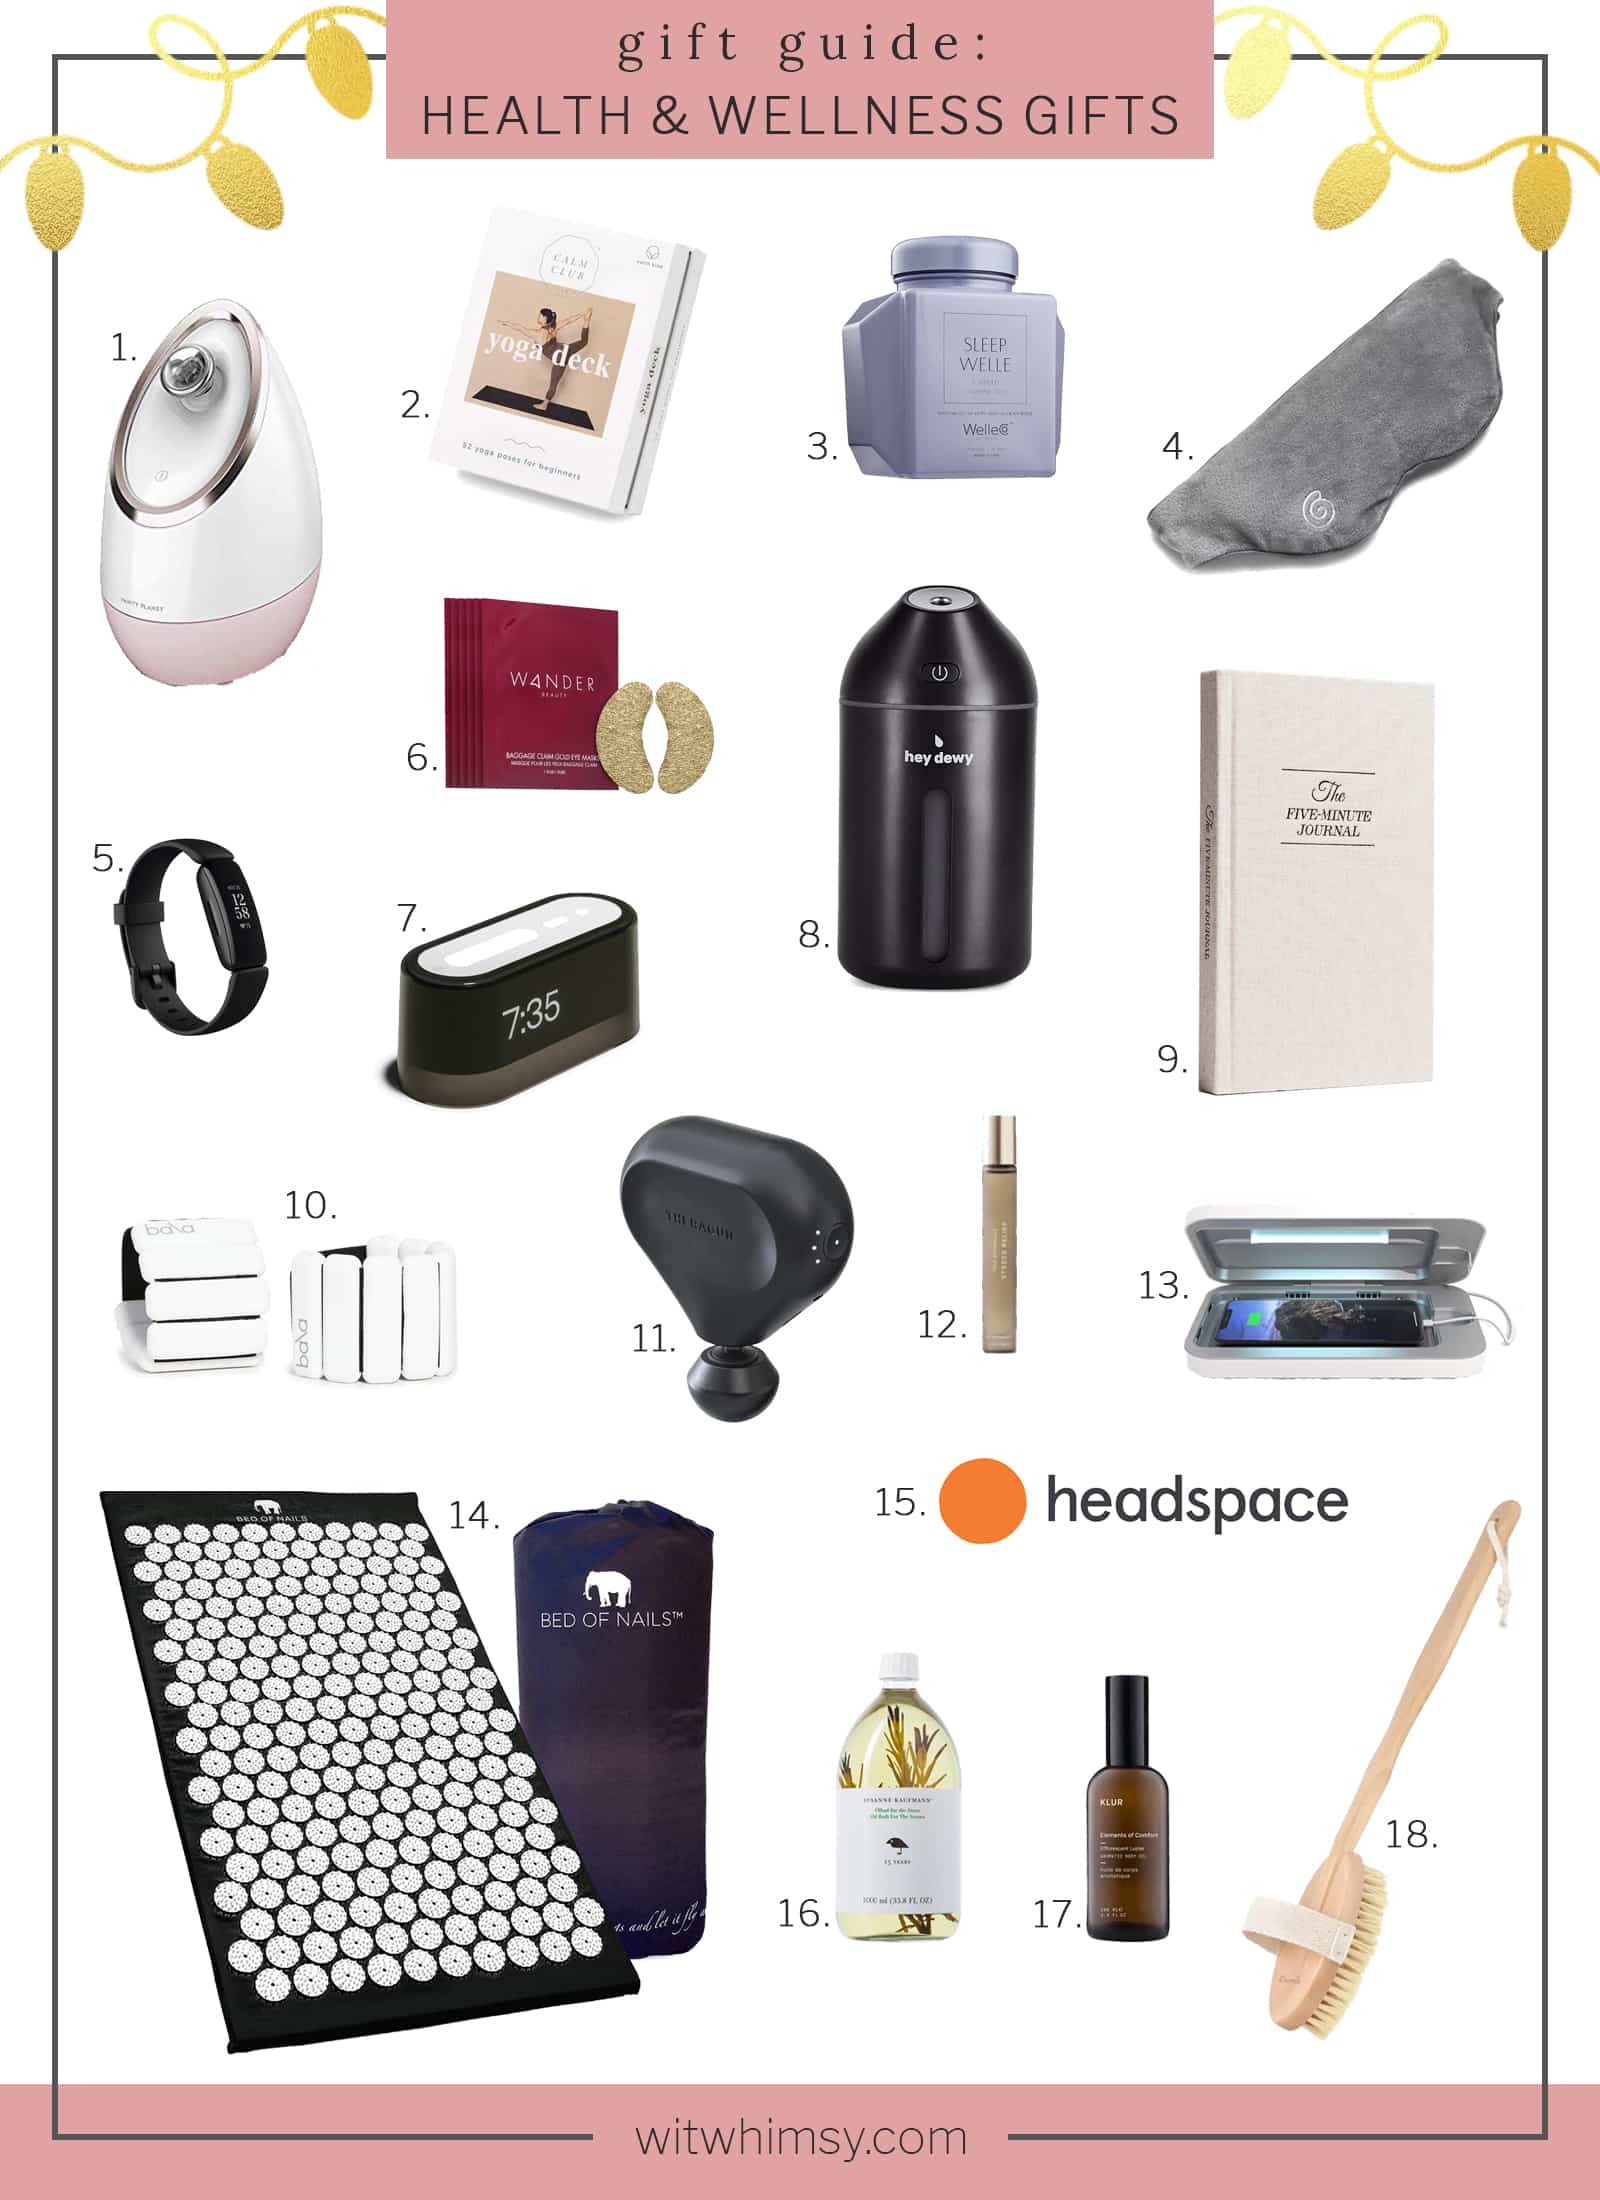 141 wellness-inspired gift ideas for everyone on your list